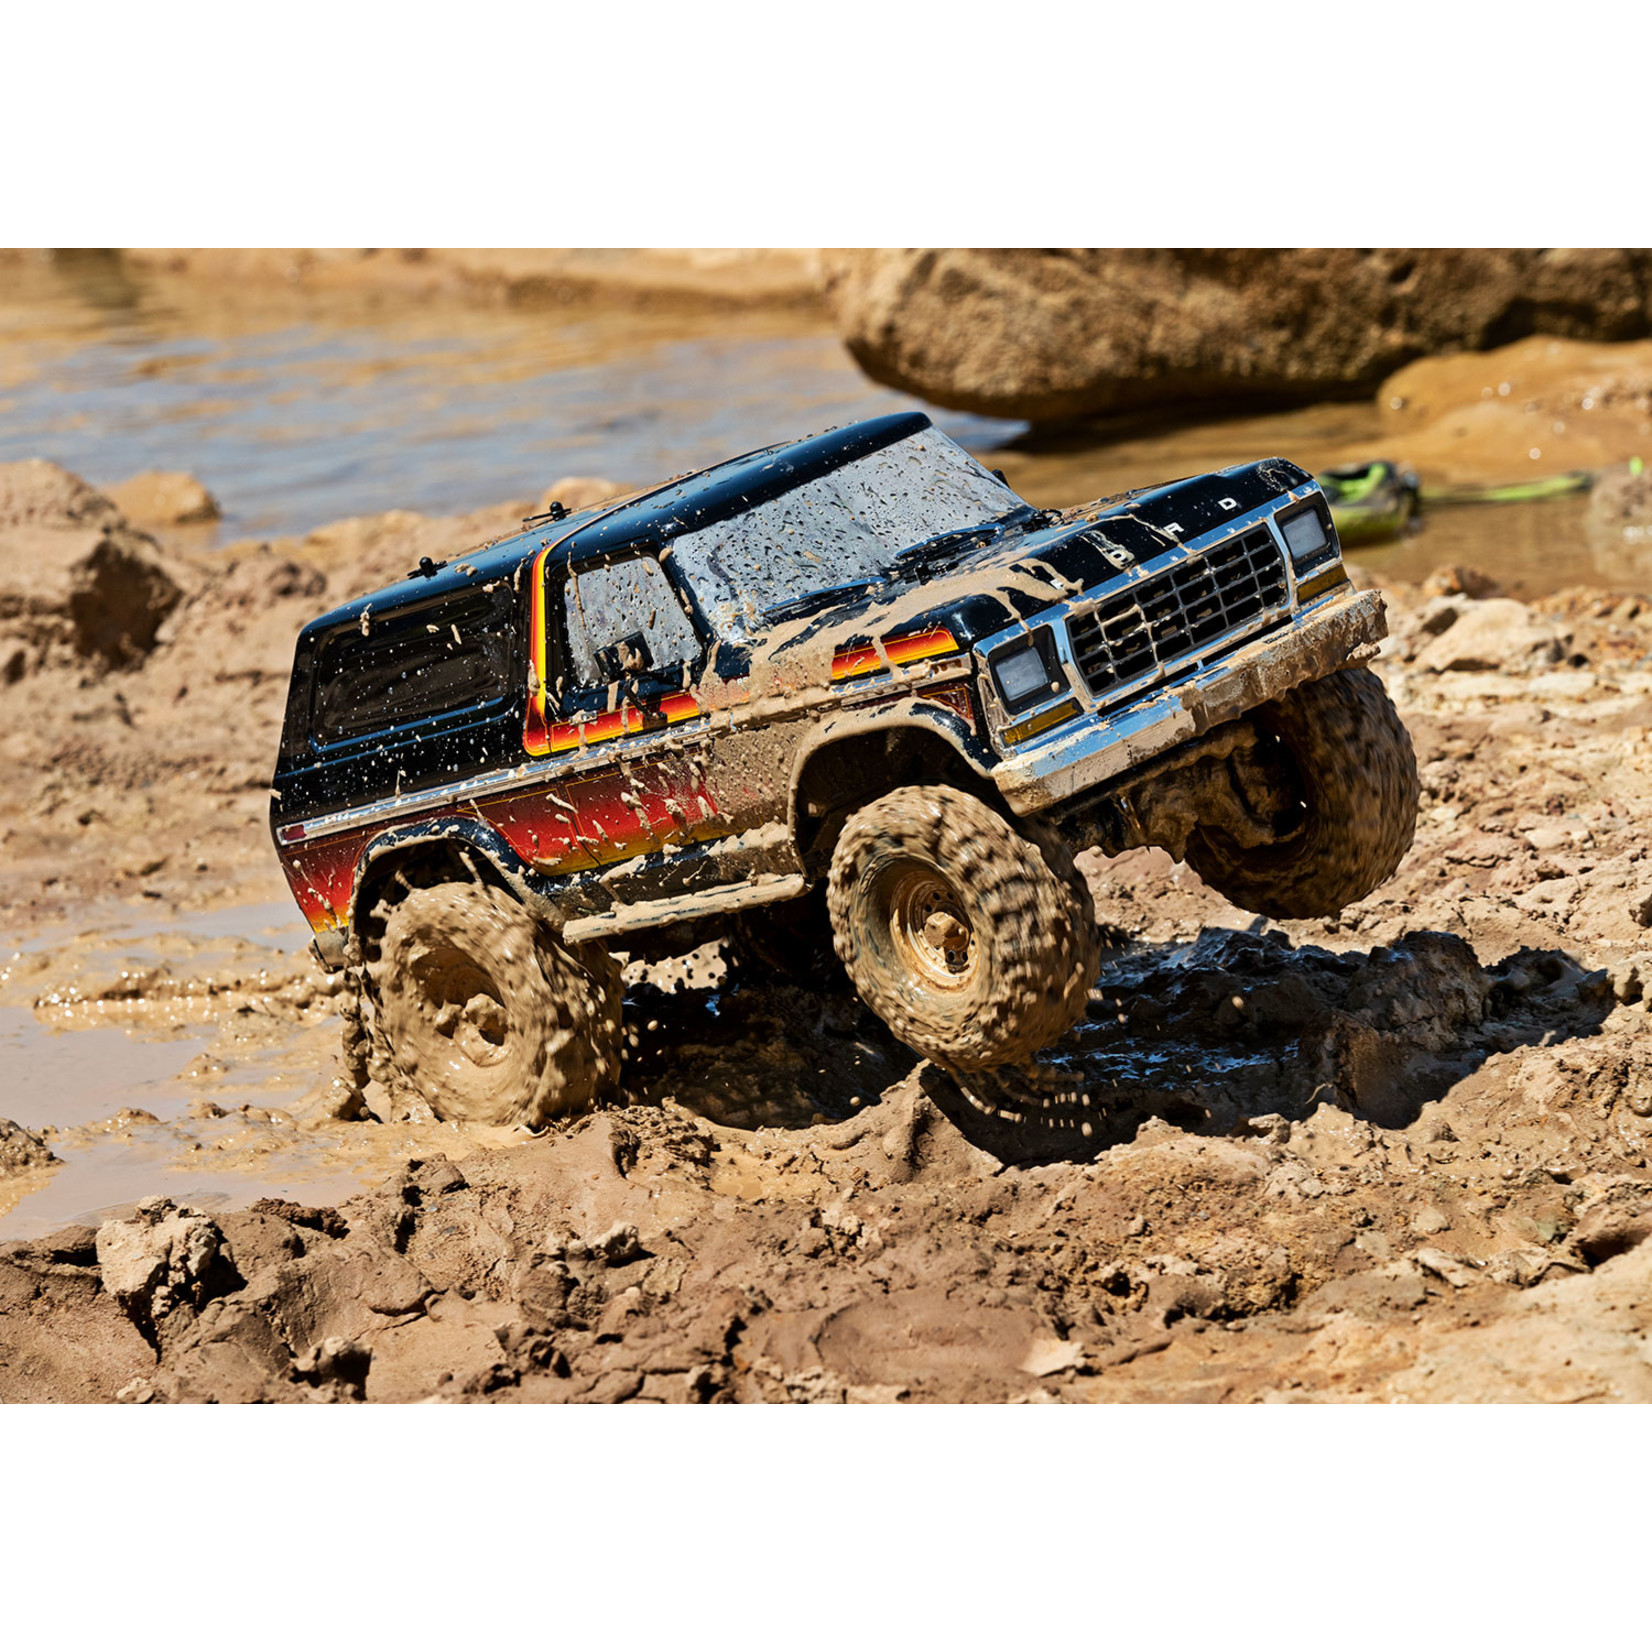 Traxxas TRX-4 Scale and Trail Crawler with 1979 Ford Bronco Body: 1/10 Scale 4WD Electric Truck